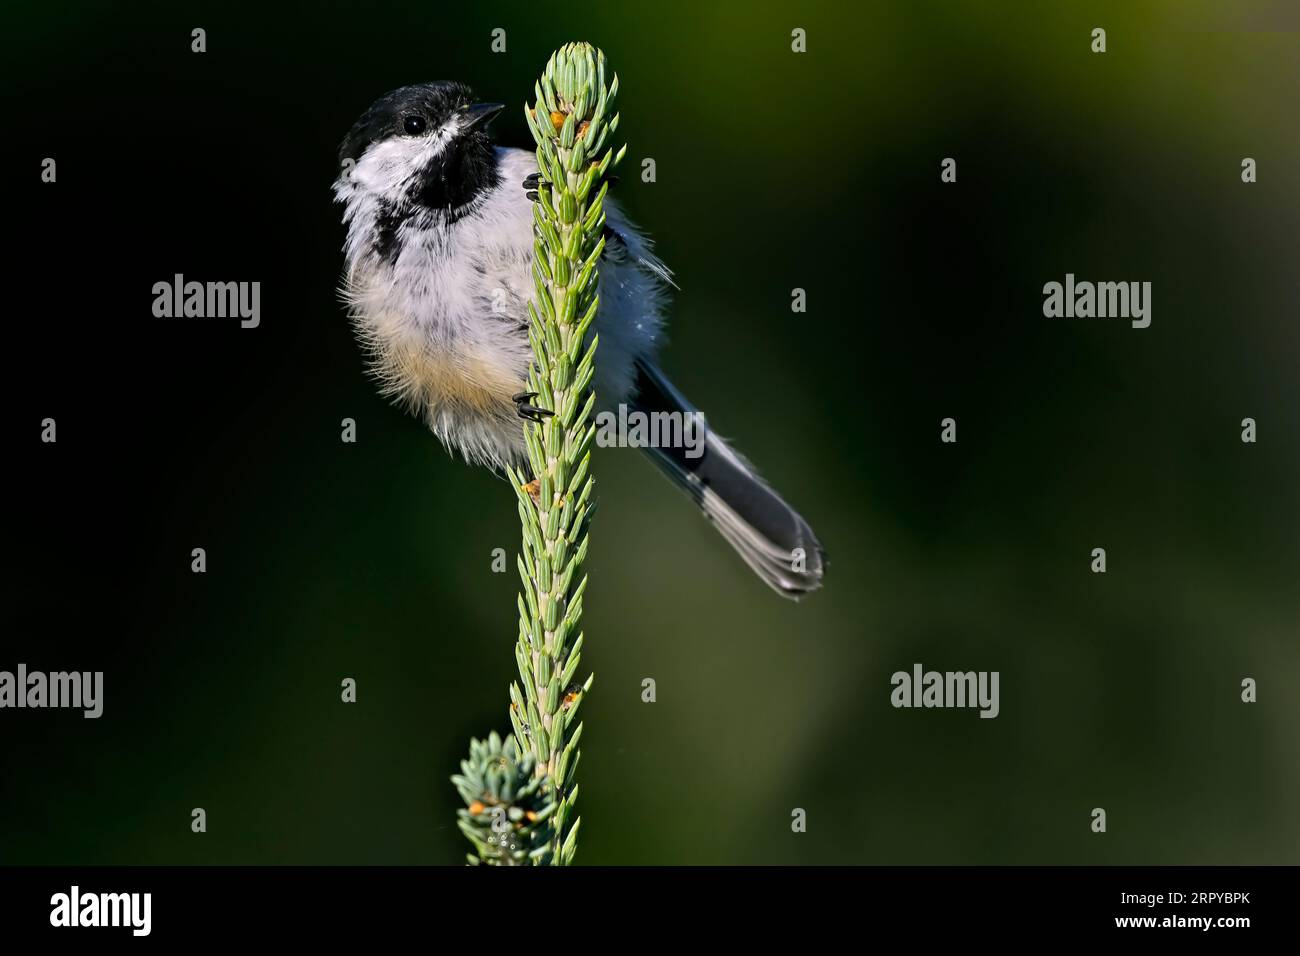 A Black-capped Chickadee bird 'Poecile atricapillus',  foraging for insects on a spruce tree top Stock Photo